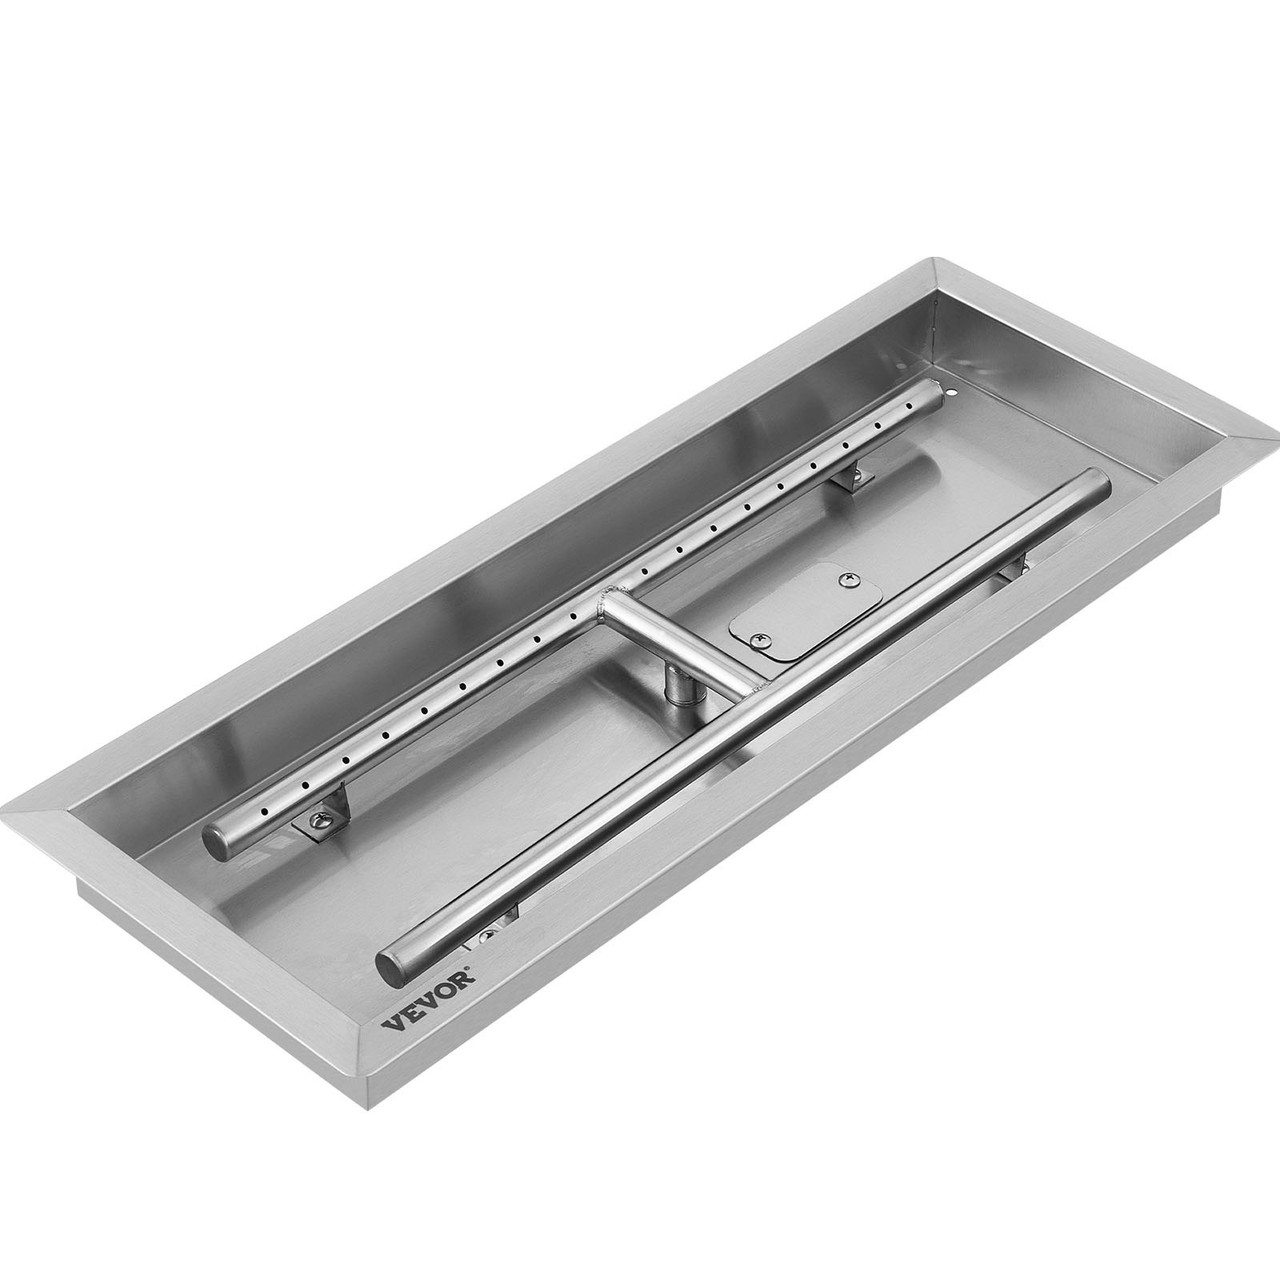 25.5x10 Inch Stainless Steel Rectangular Built-in Fire Pit Pan with H-Burner 90K BTU, Silver